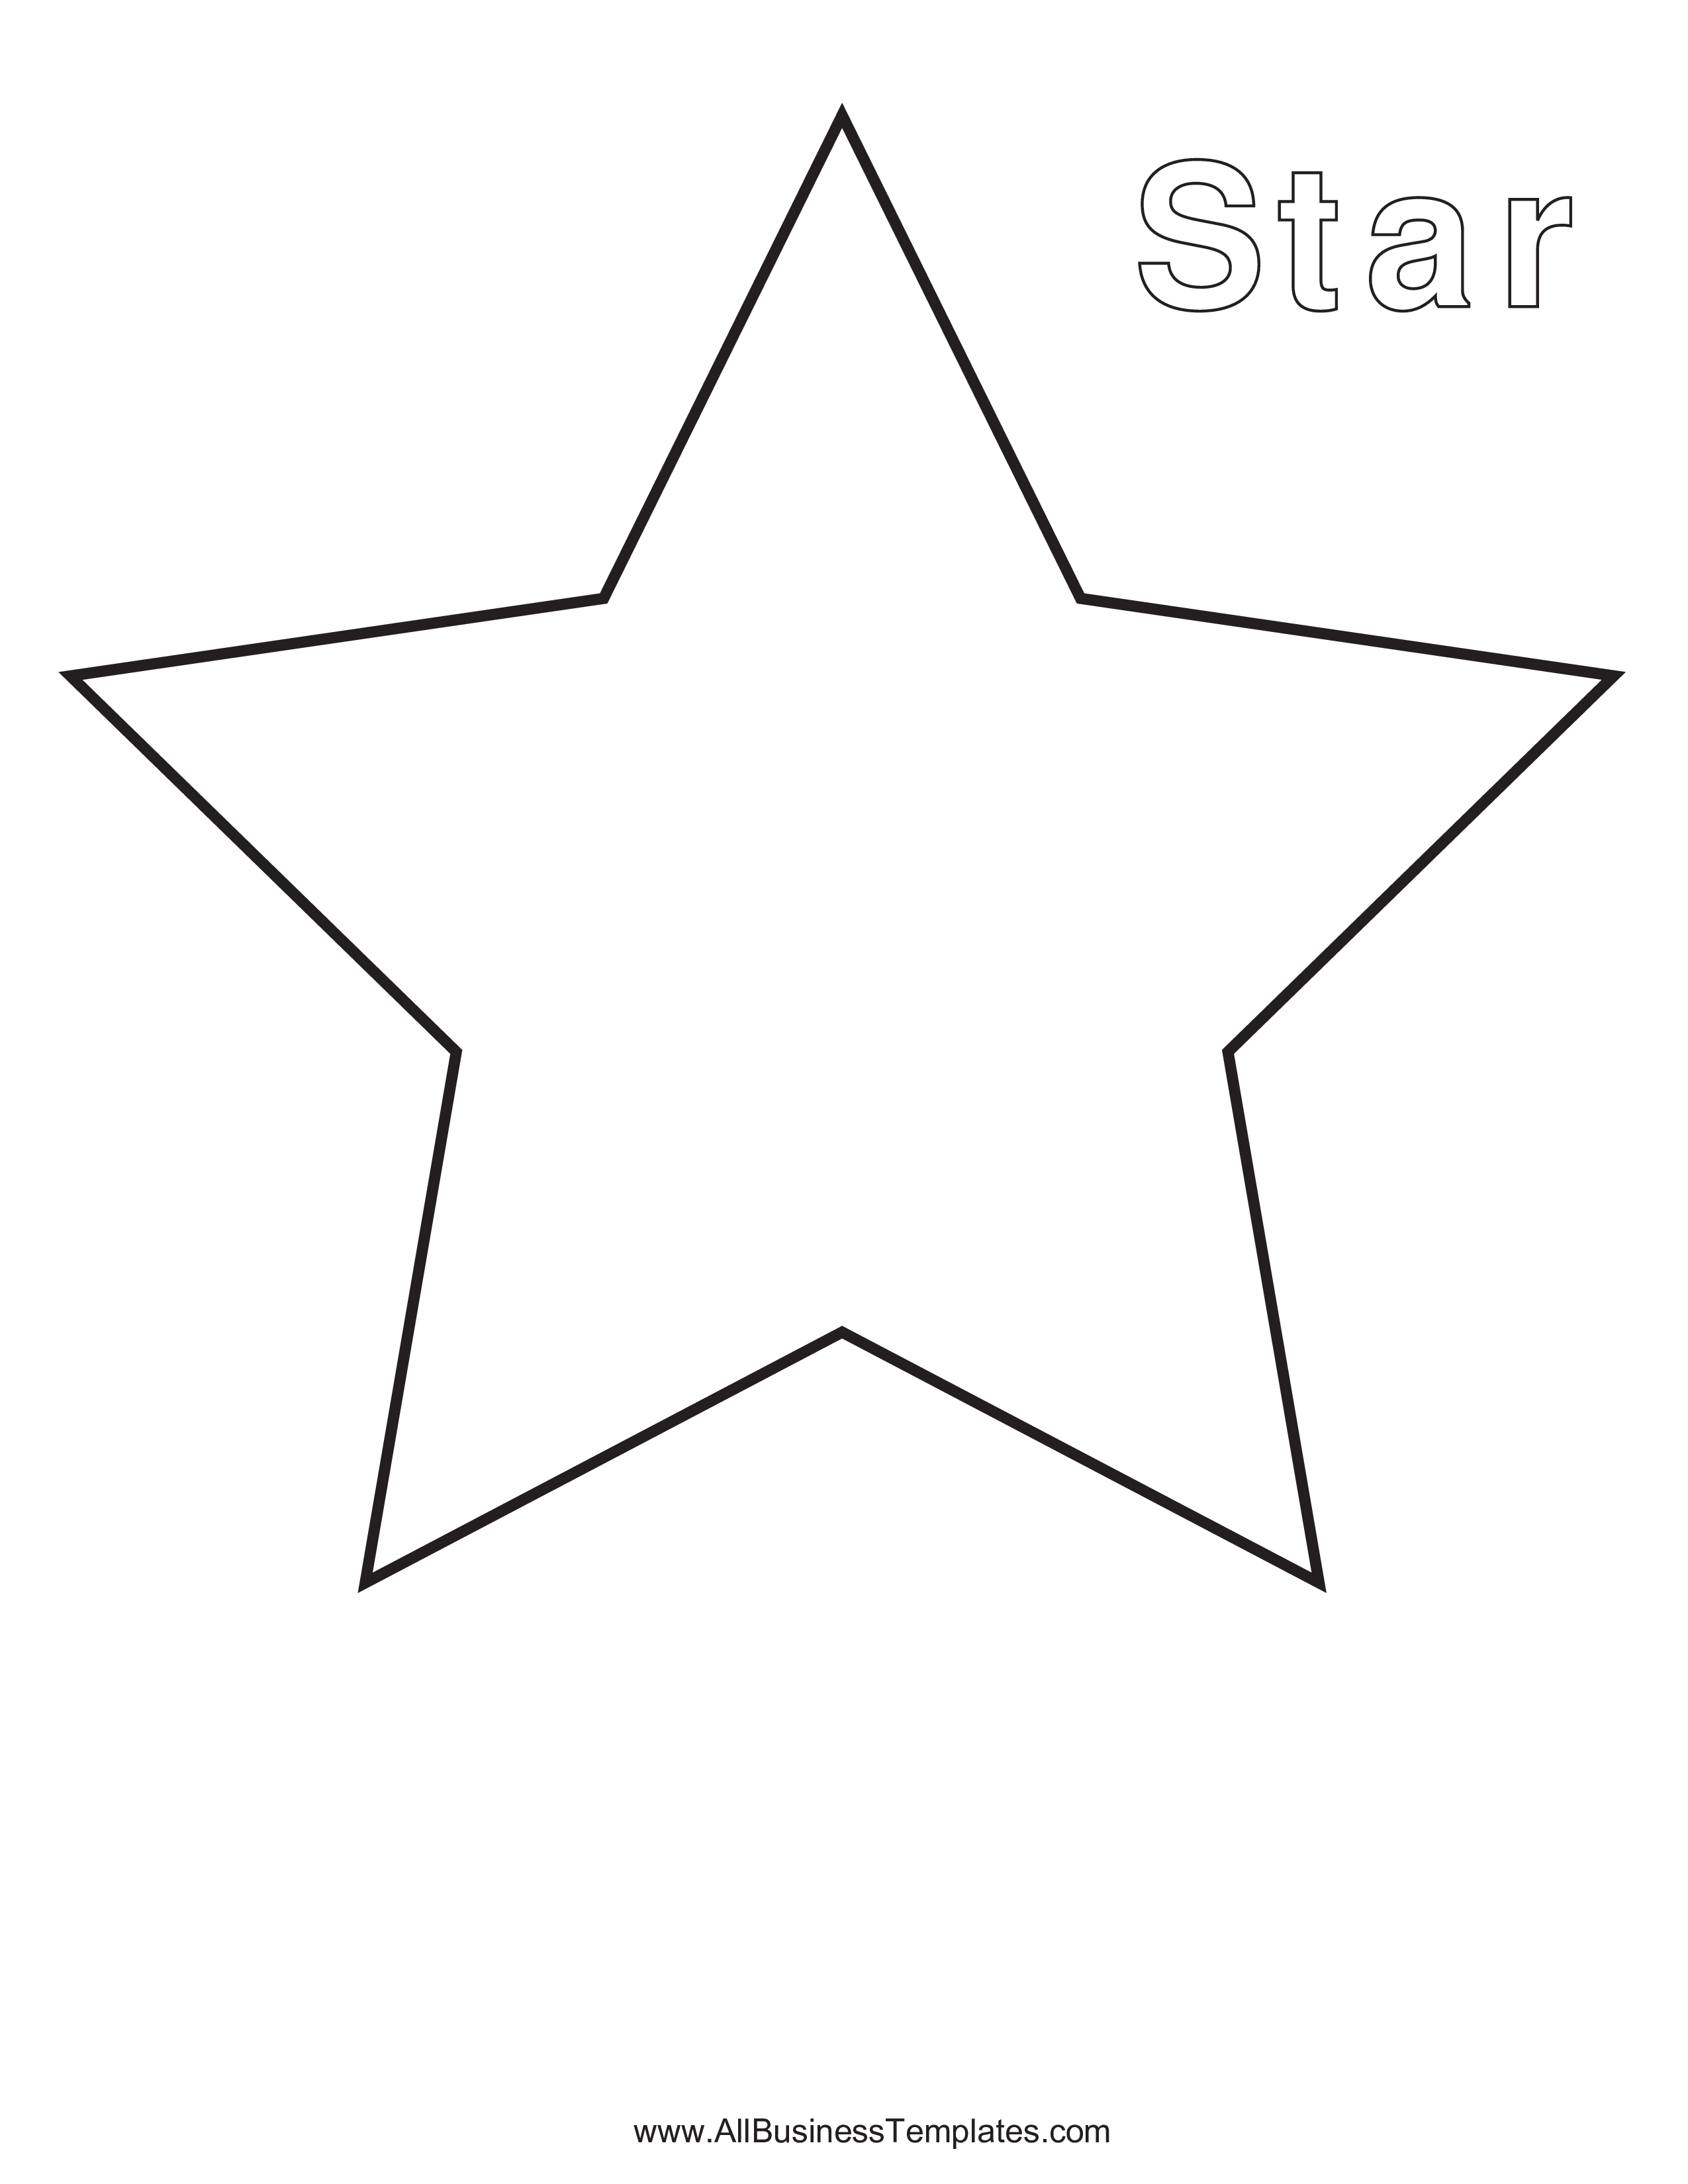 Simple Star Template | Templates at allbusinesstemplates.com